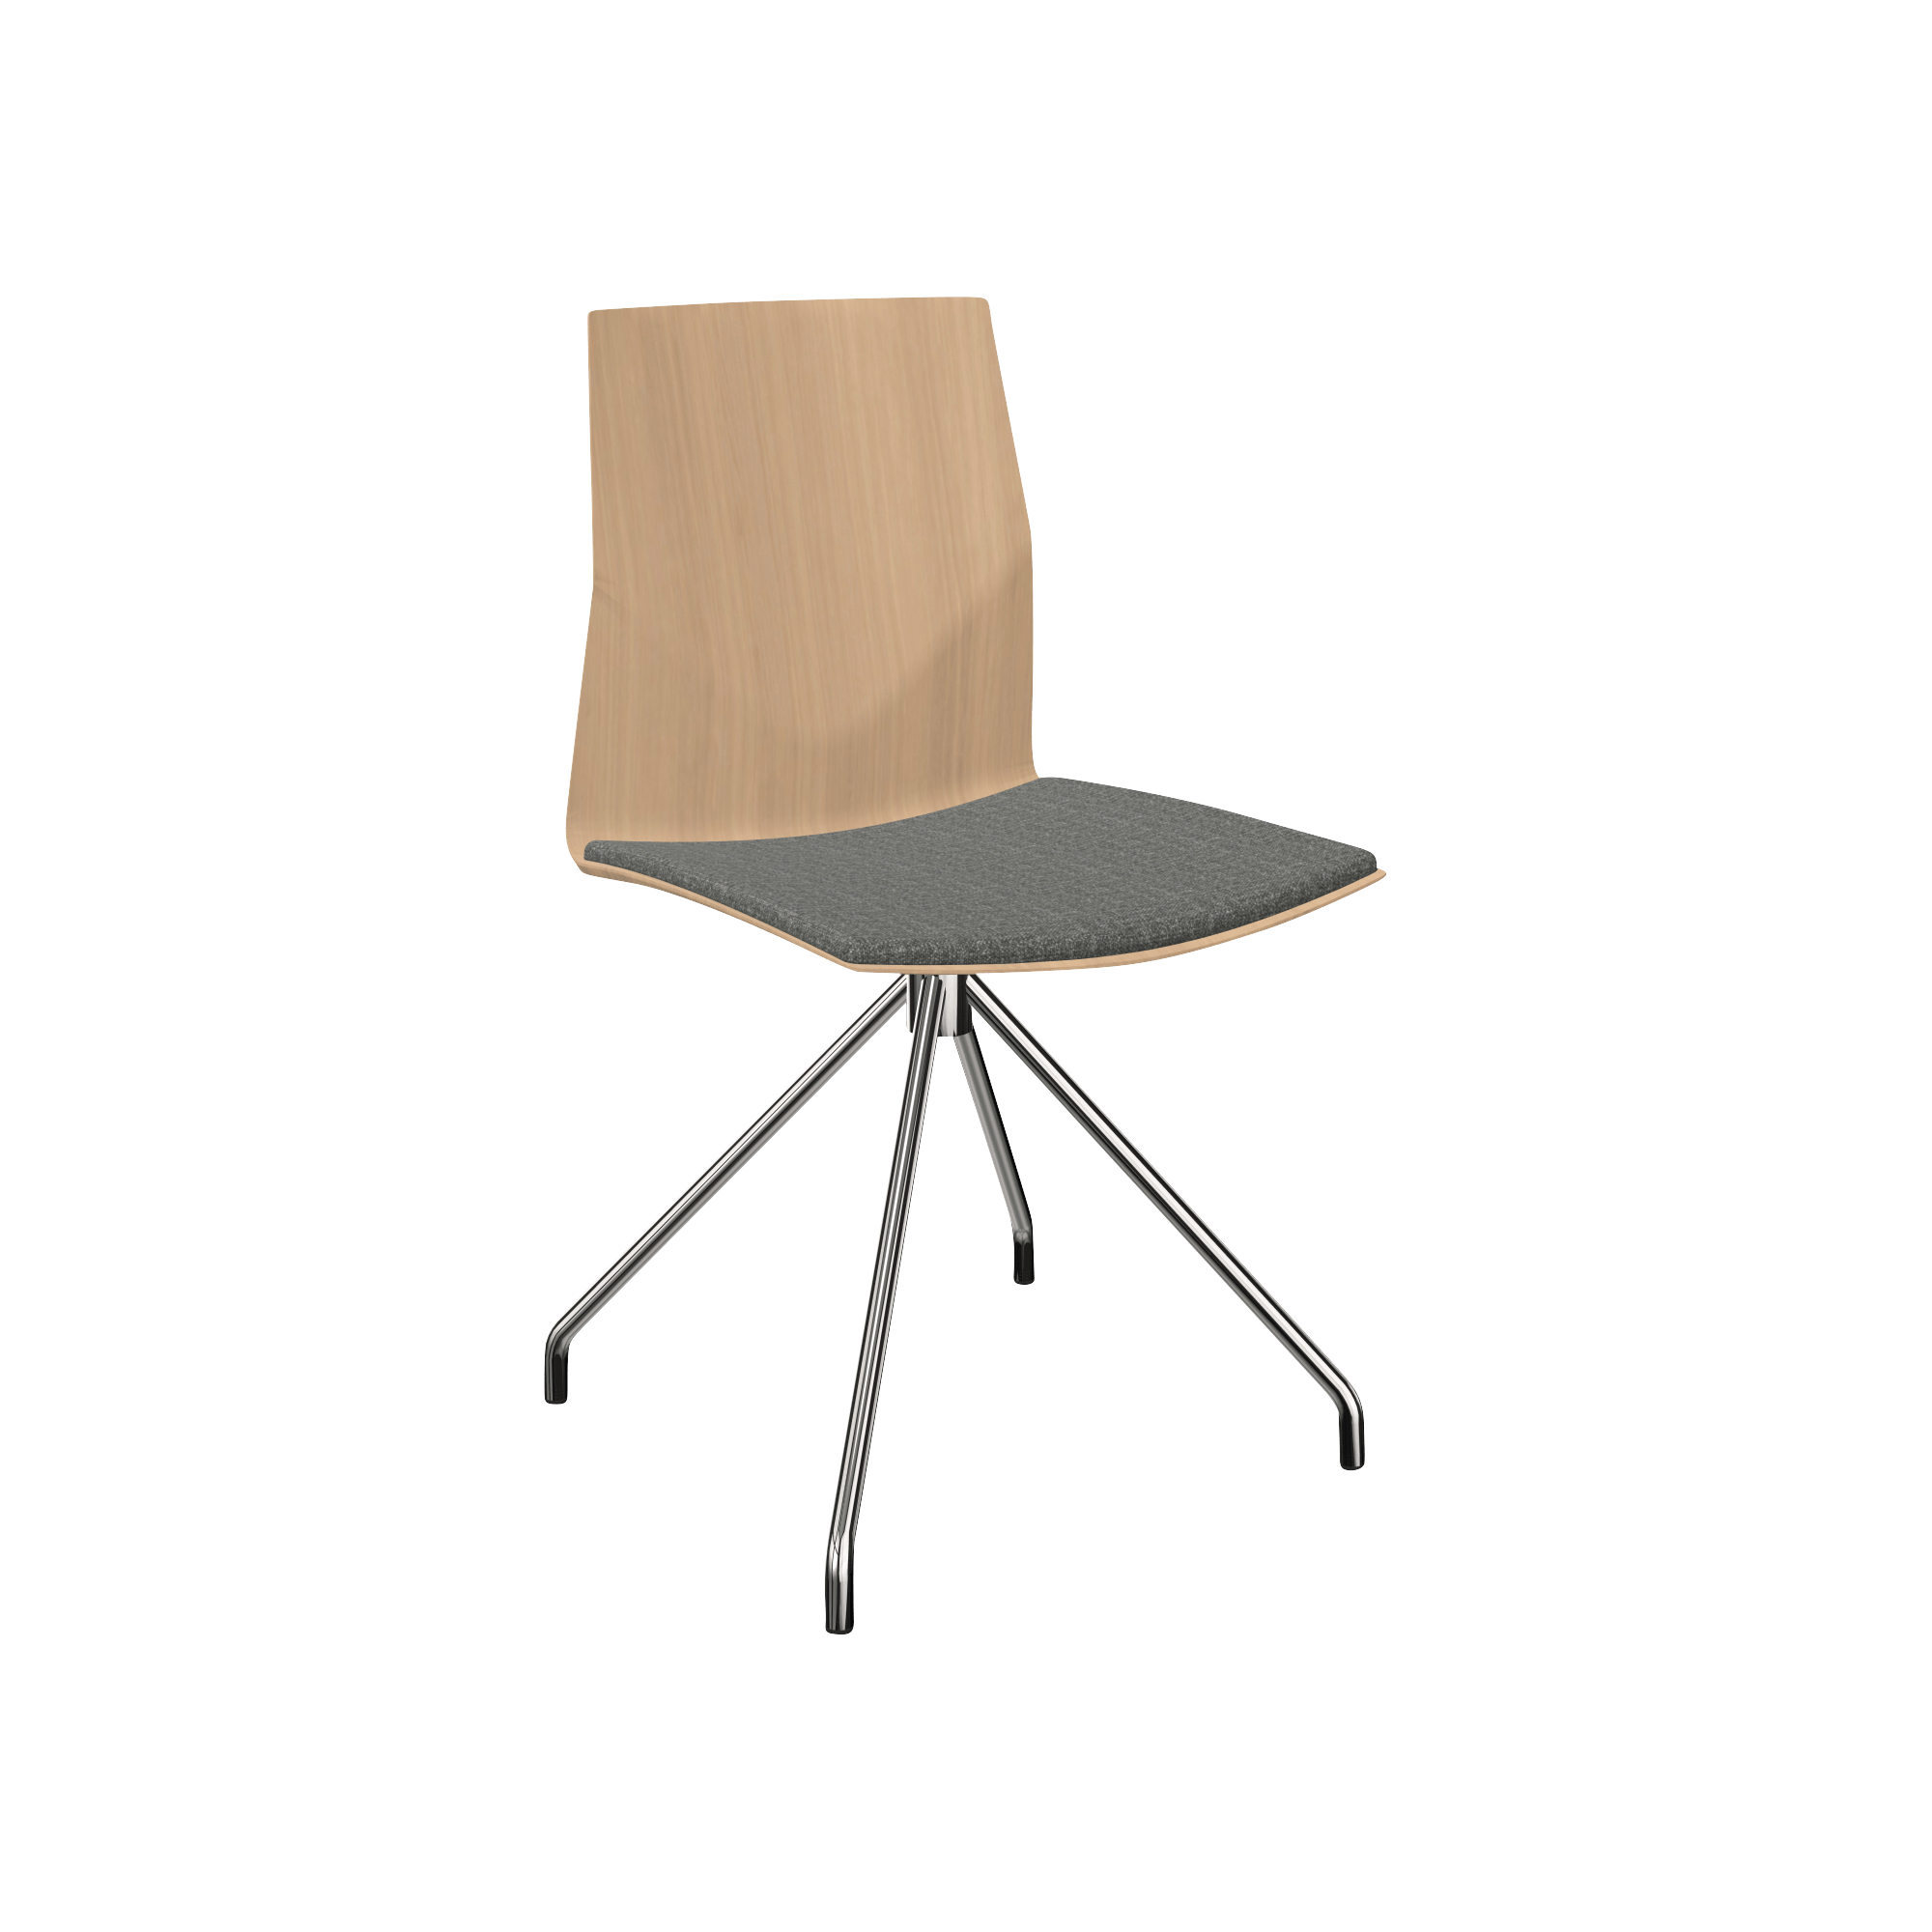 A wooden chair with metal legs.